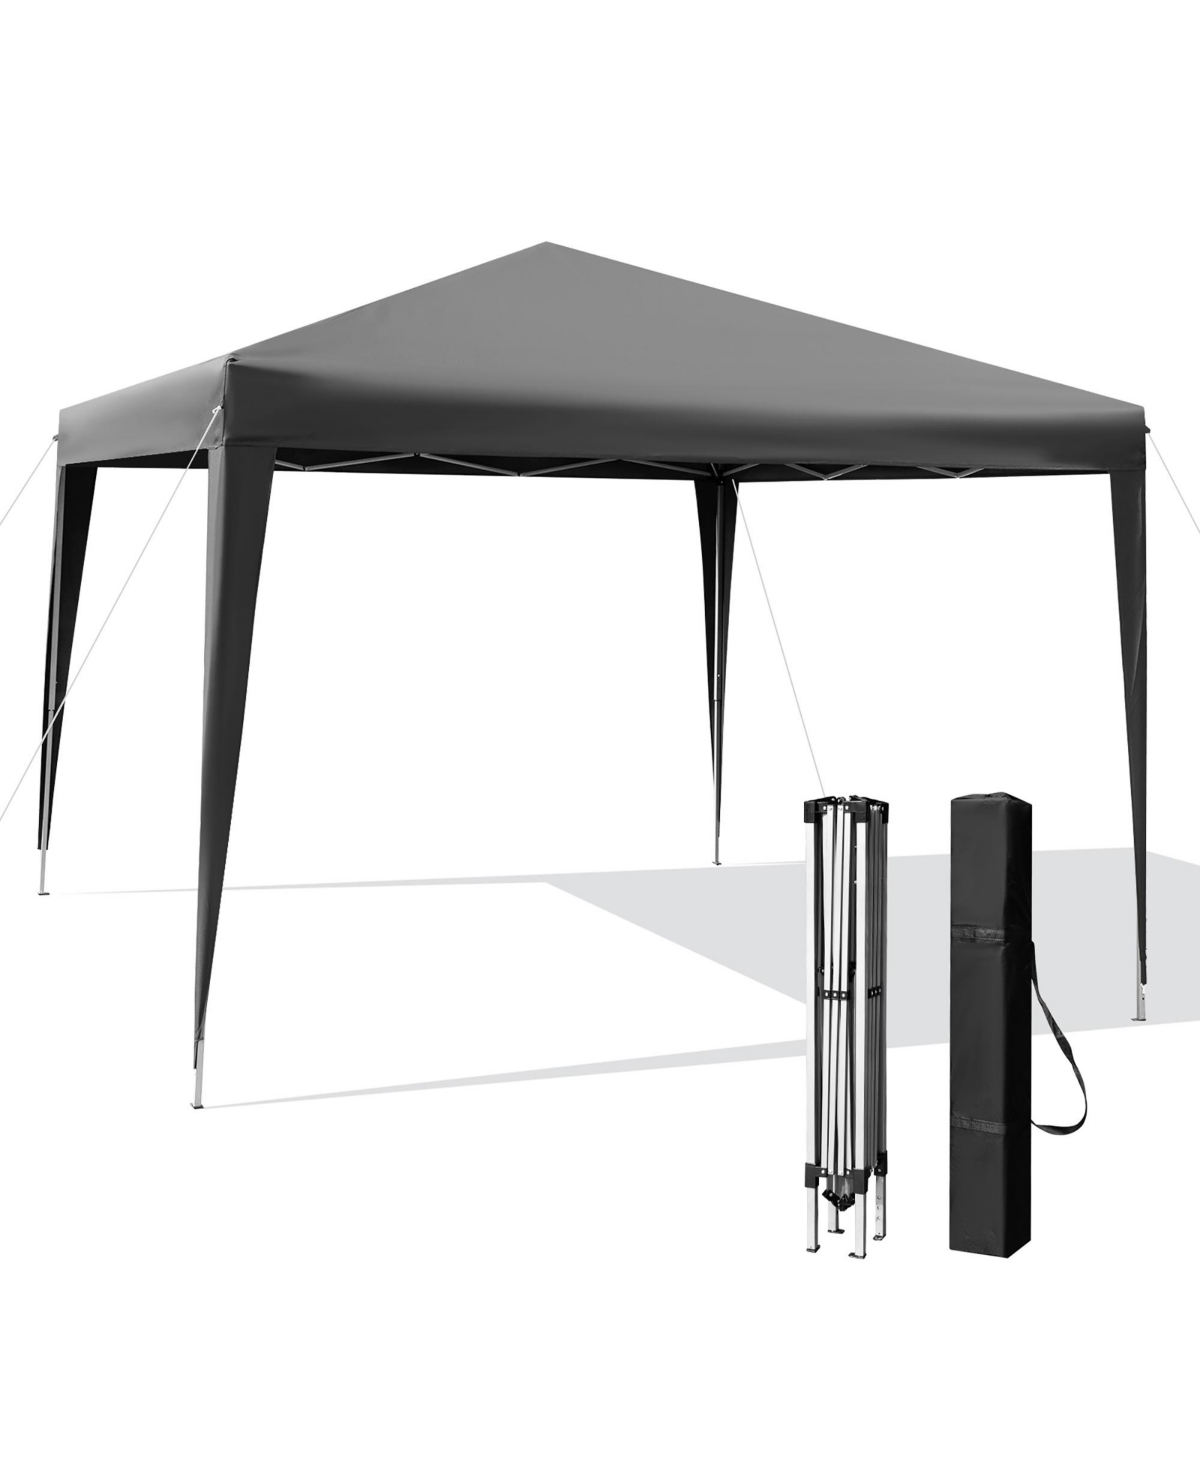 Patio 10x10ft Outdoor Instant Pop-up Canopy Folding Sun Shelter Carry Bag - Grey